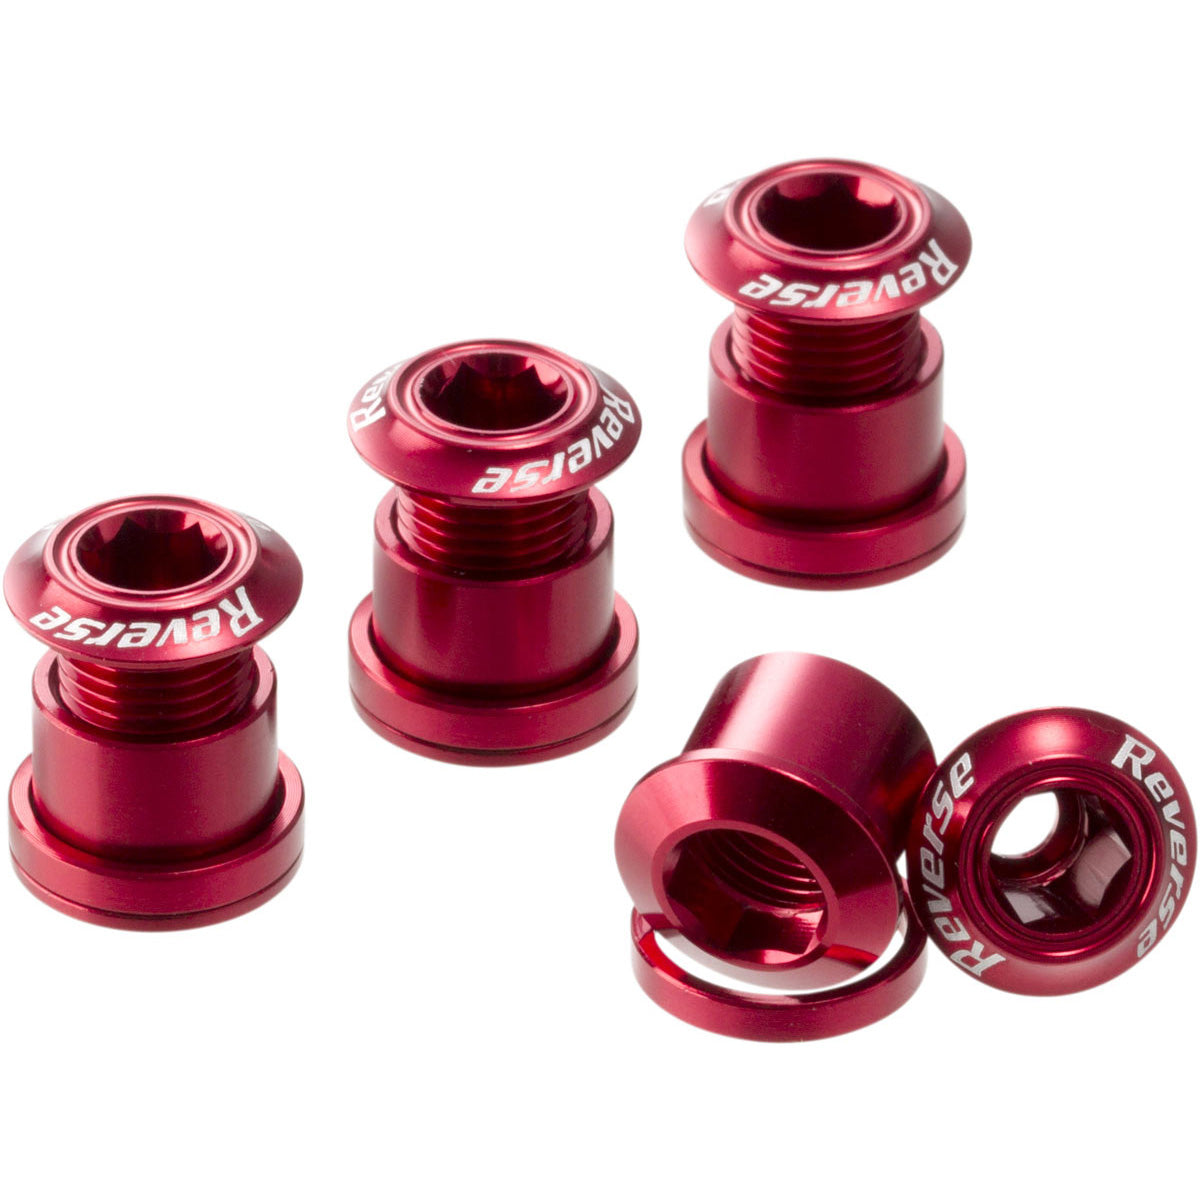 Reverse Chainring Bolt Set 8pc - Red